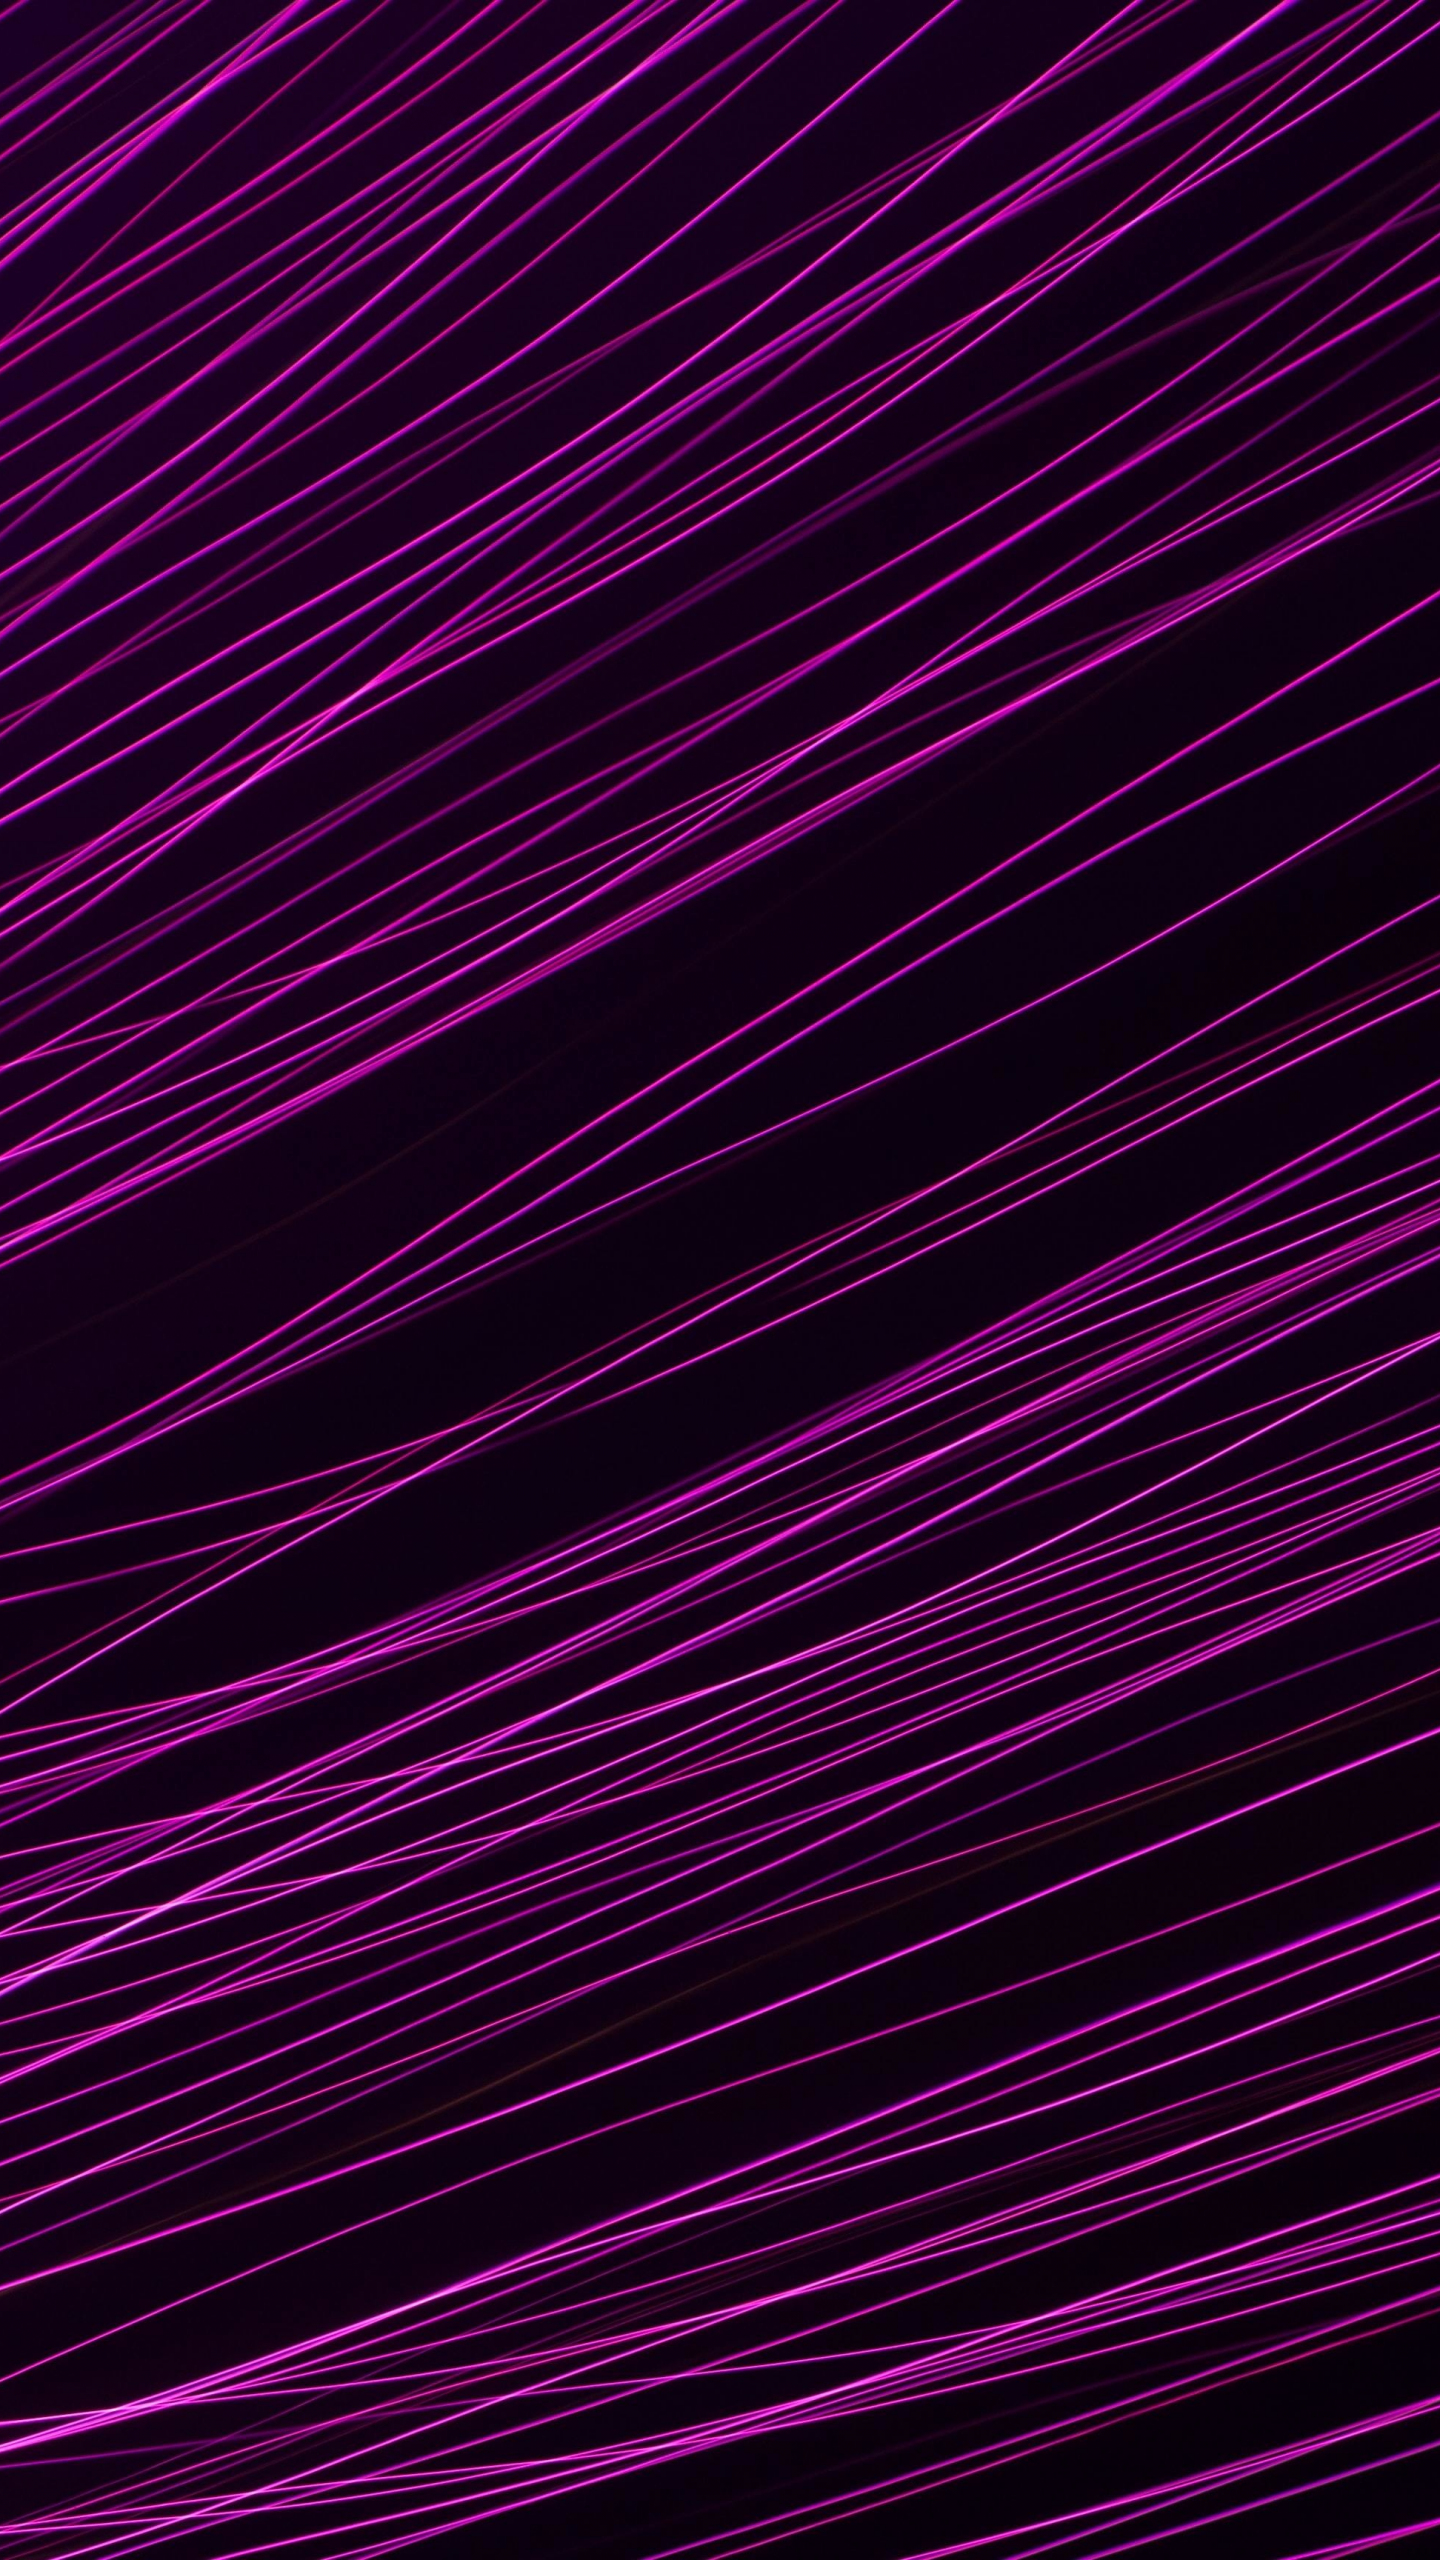 Download wallpaper 1440x2560 abstraction, pink threads, qhd samsung ...